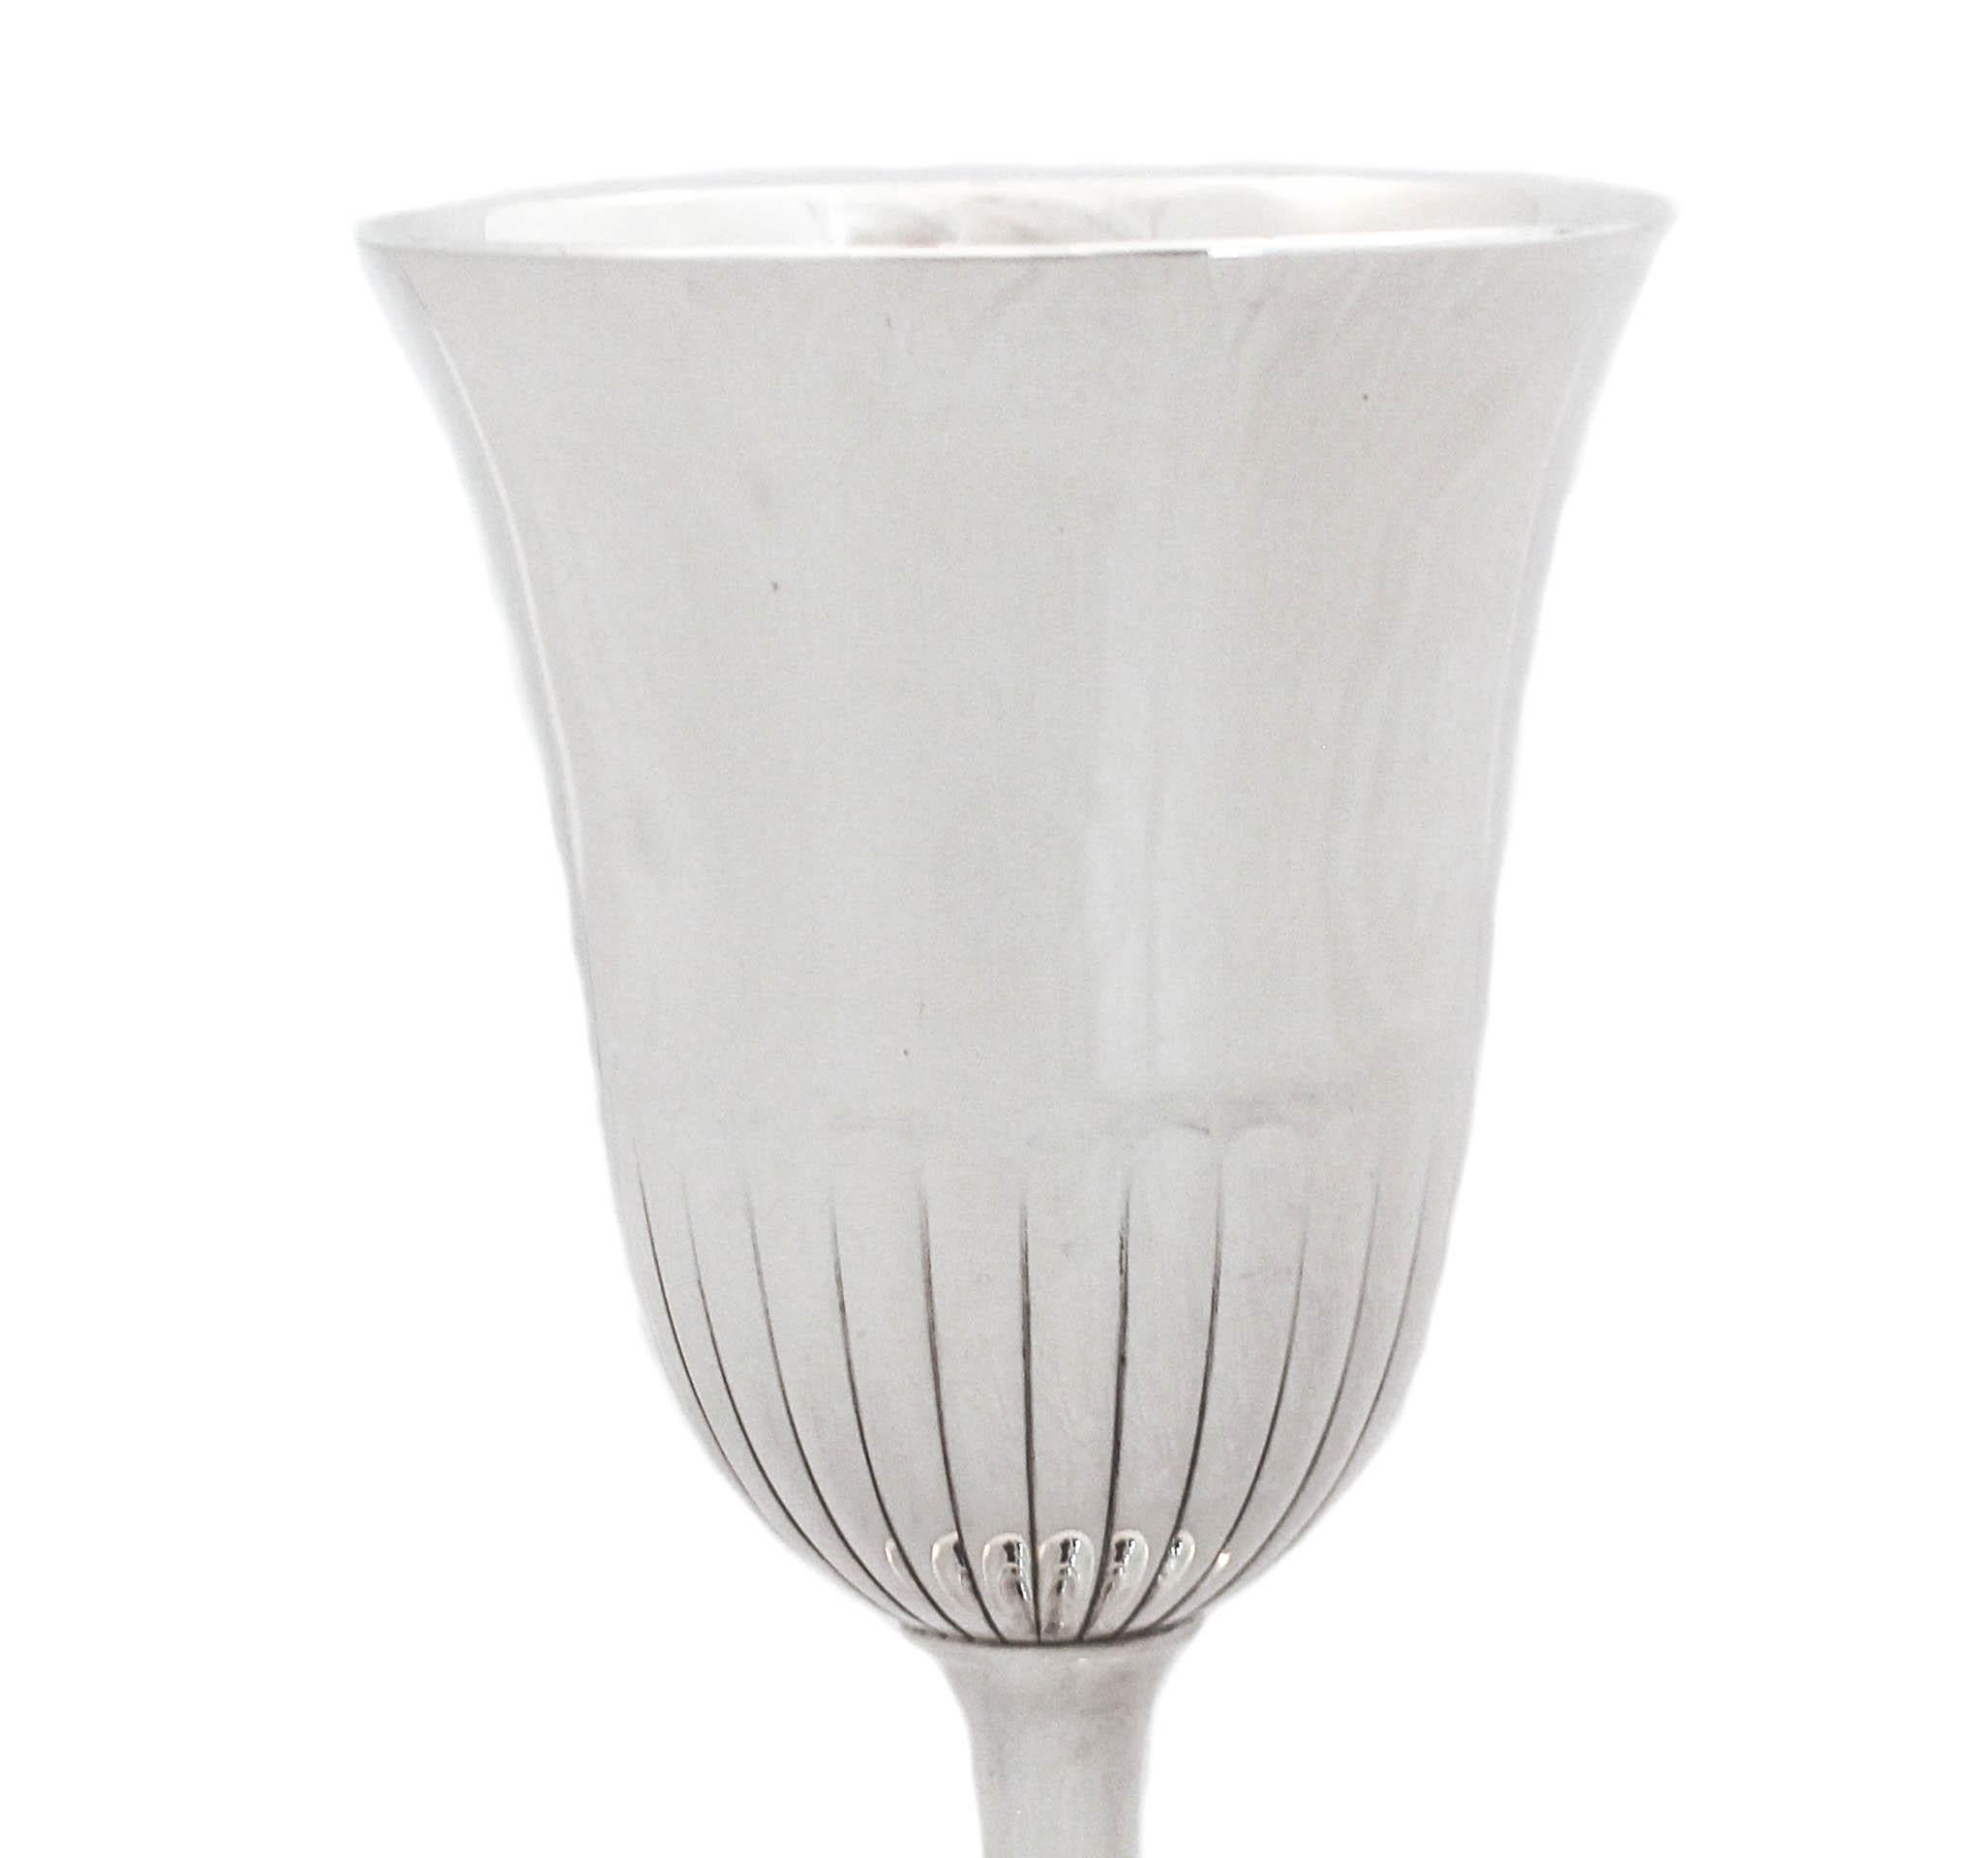 This large sterling silver goblet was made by Wallace Silversmiths. It has a beautiful shape and the base is not weighted. Sleek with a ridge design around the center giving it a some personality. This is a lovely wedding or housewares gift.